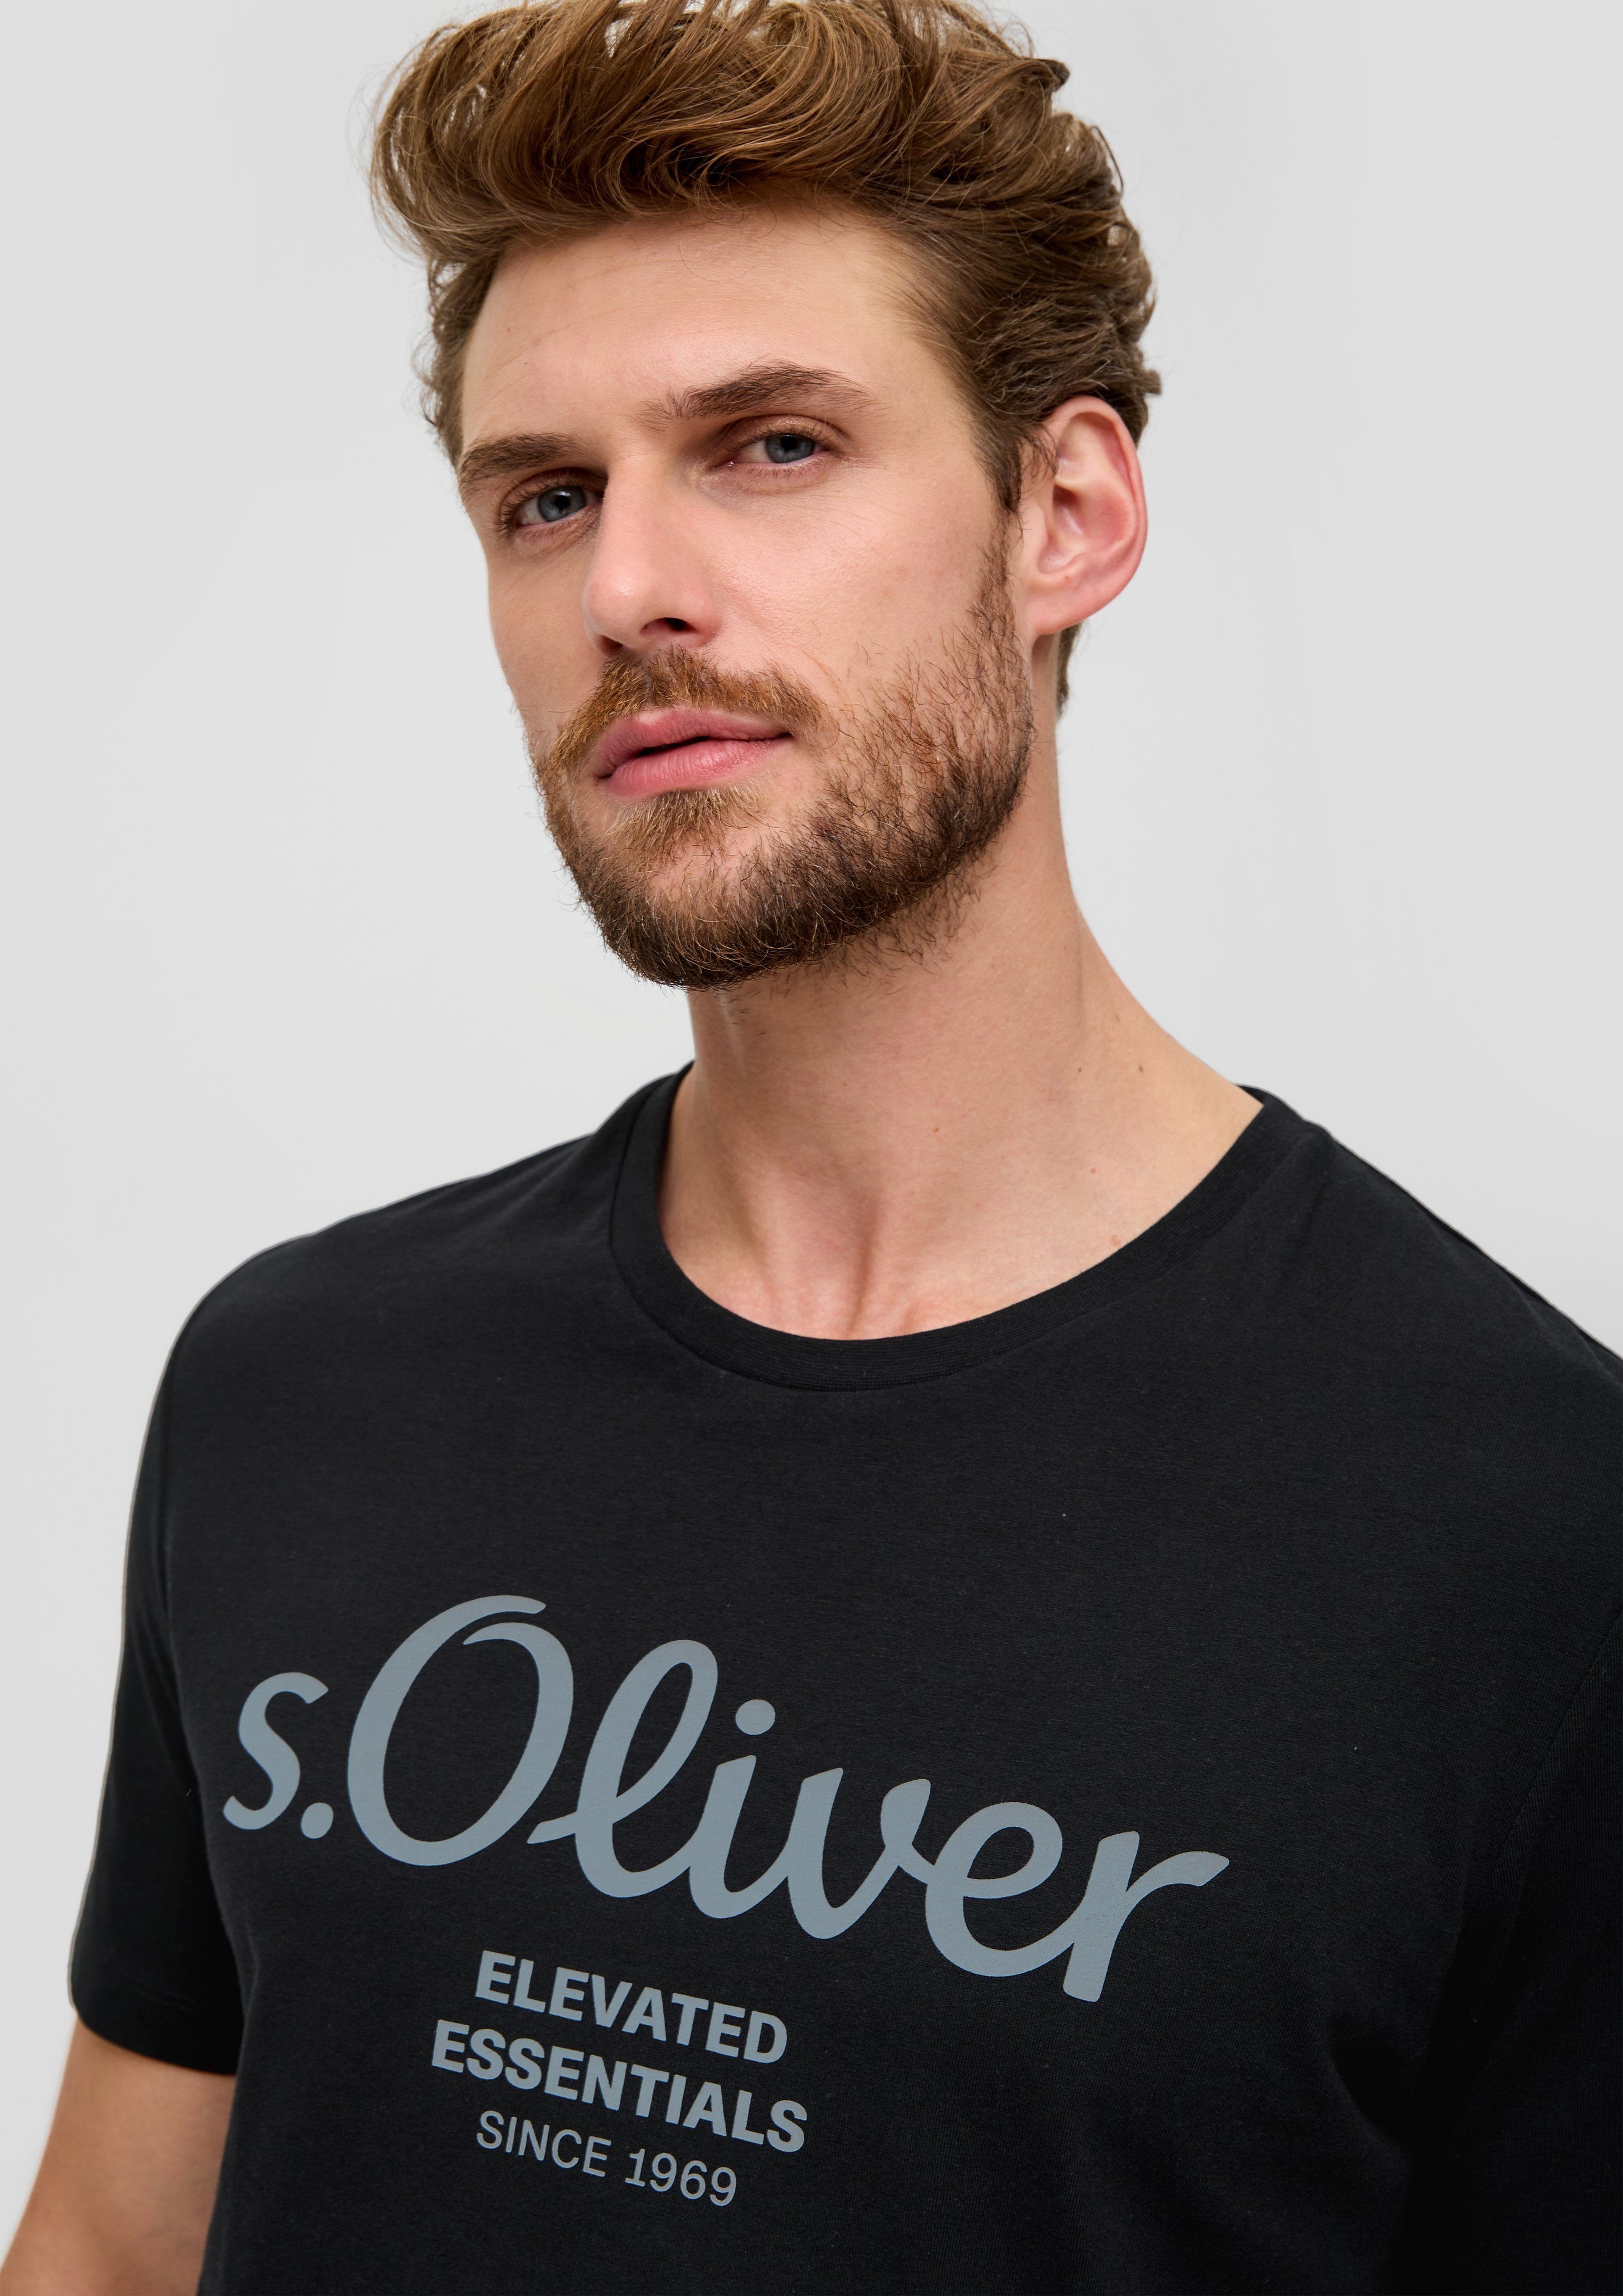 sportiven Look T-Shirt black s.Oliver im